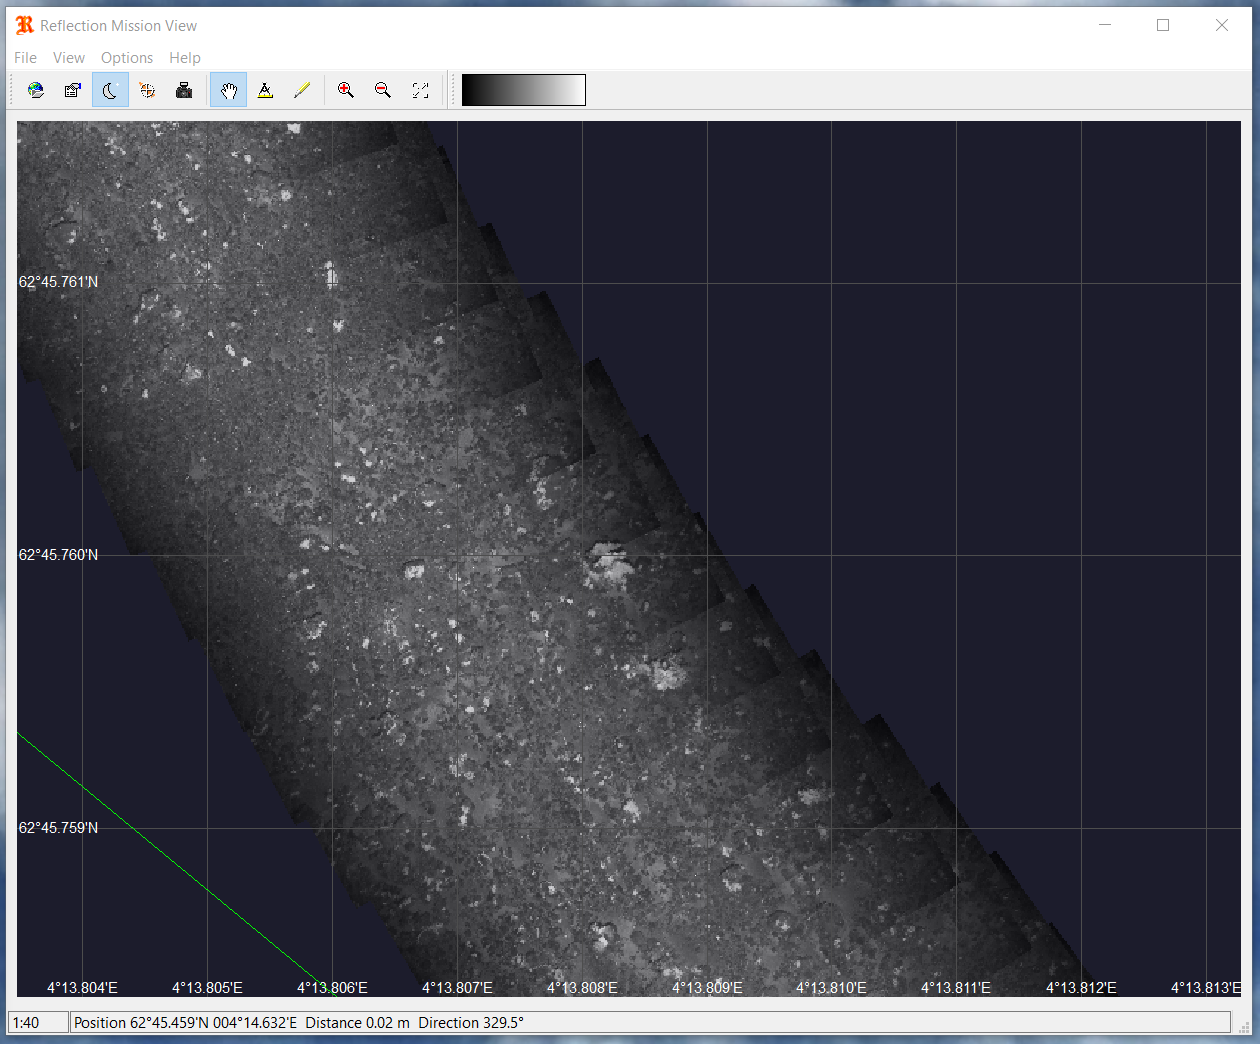 Screenshot from the reflection software showing a black and white photomosaic which has some stiping from lighting differences and minor echoing artifacts, but it is clear that there are corals and sponges visble along the transect